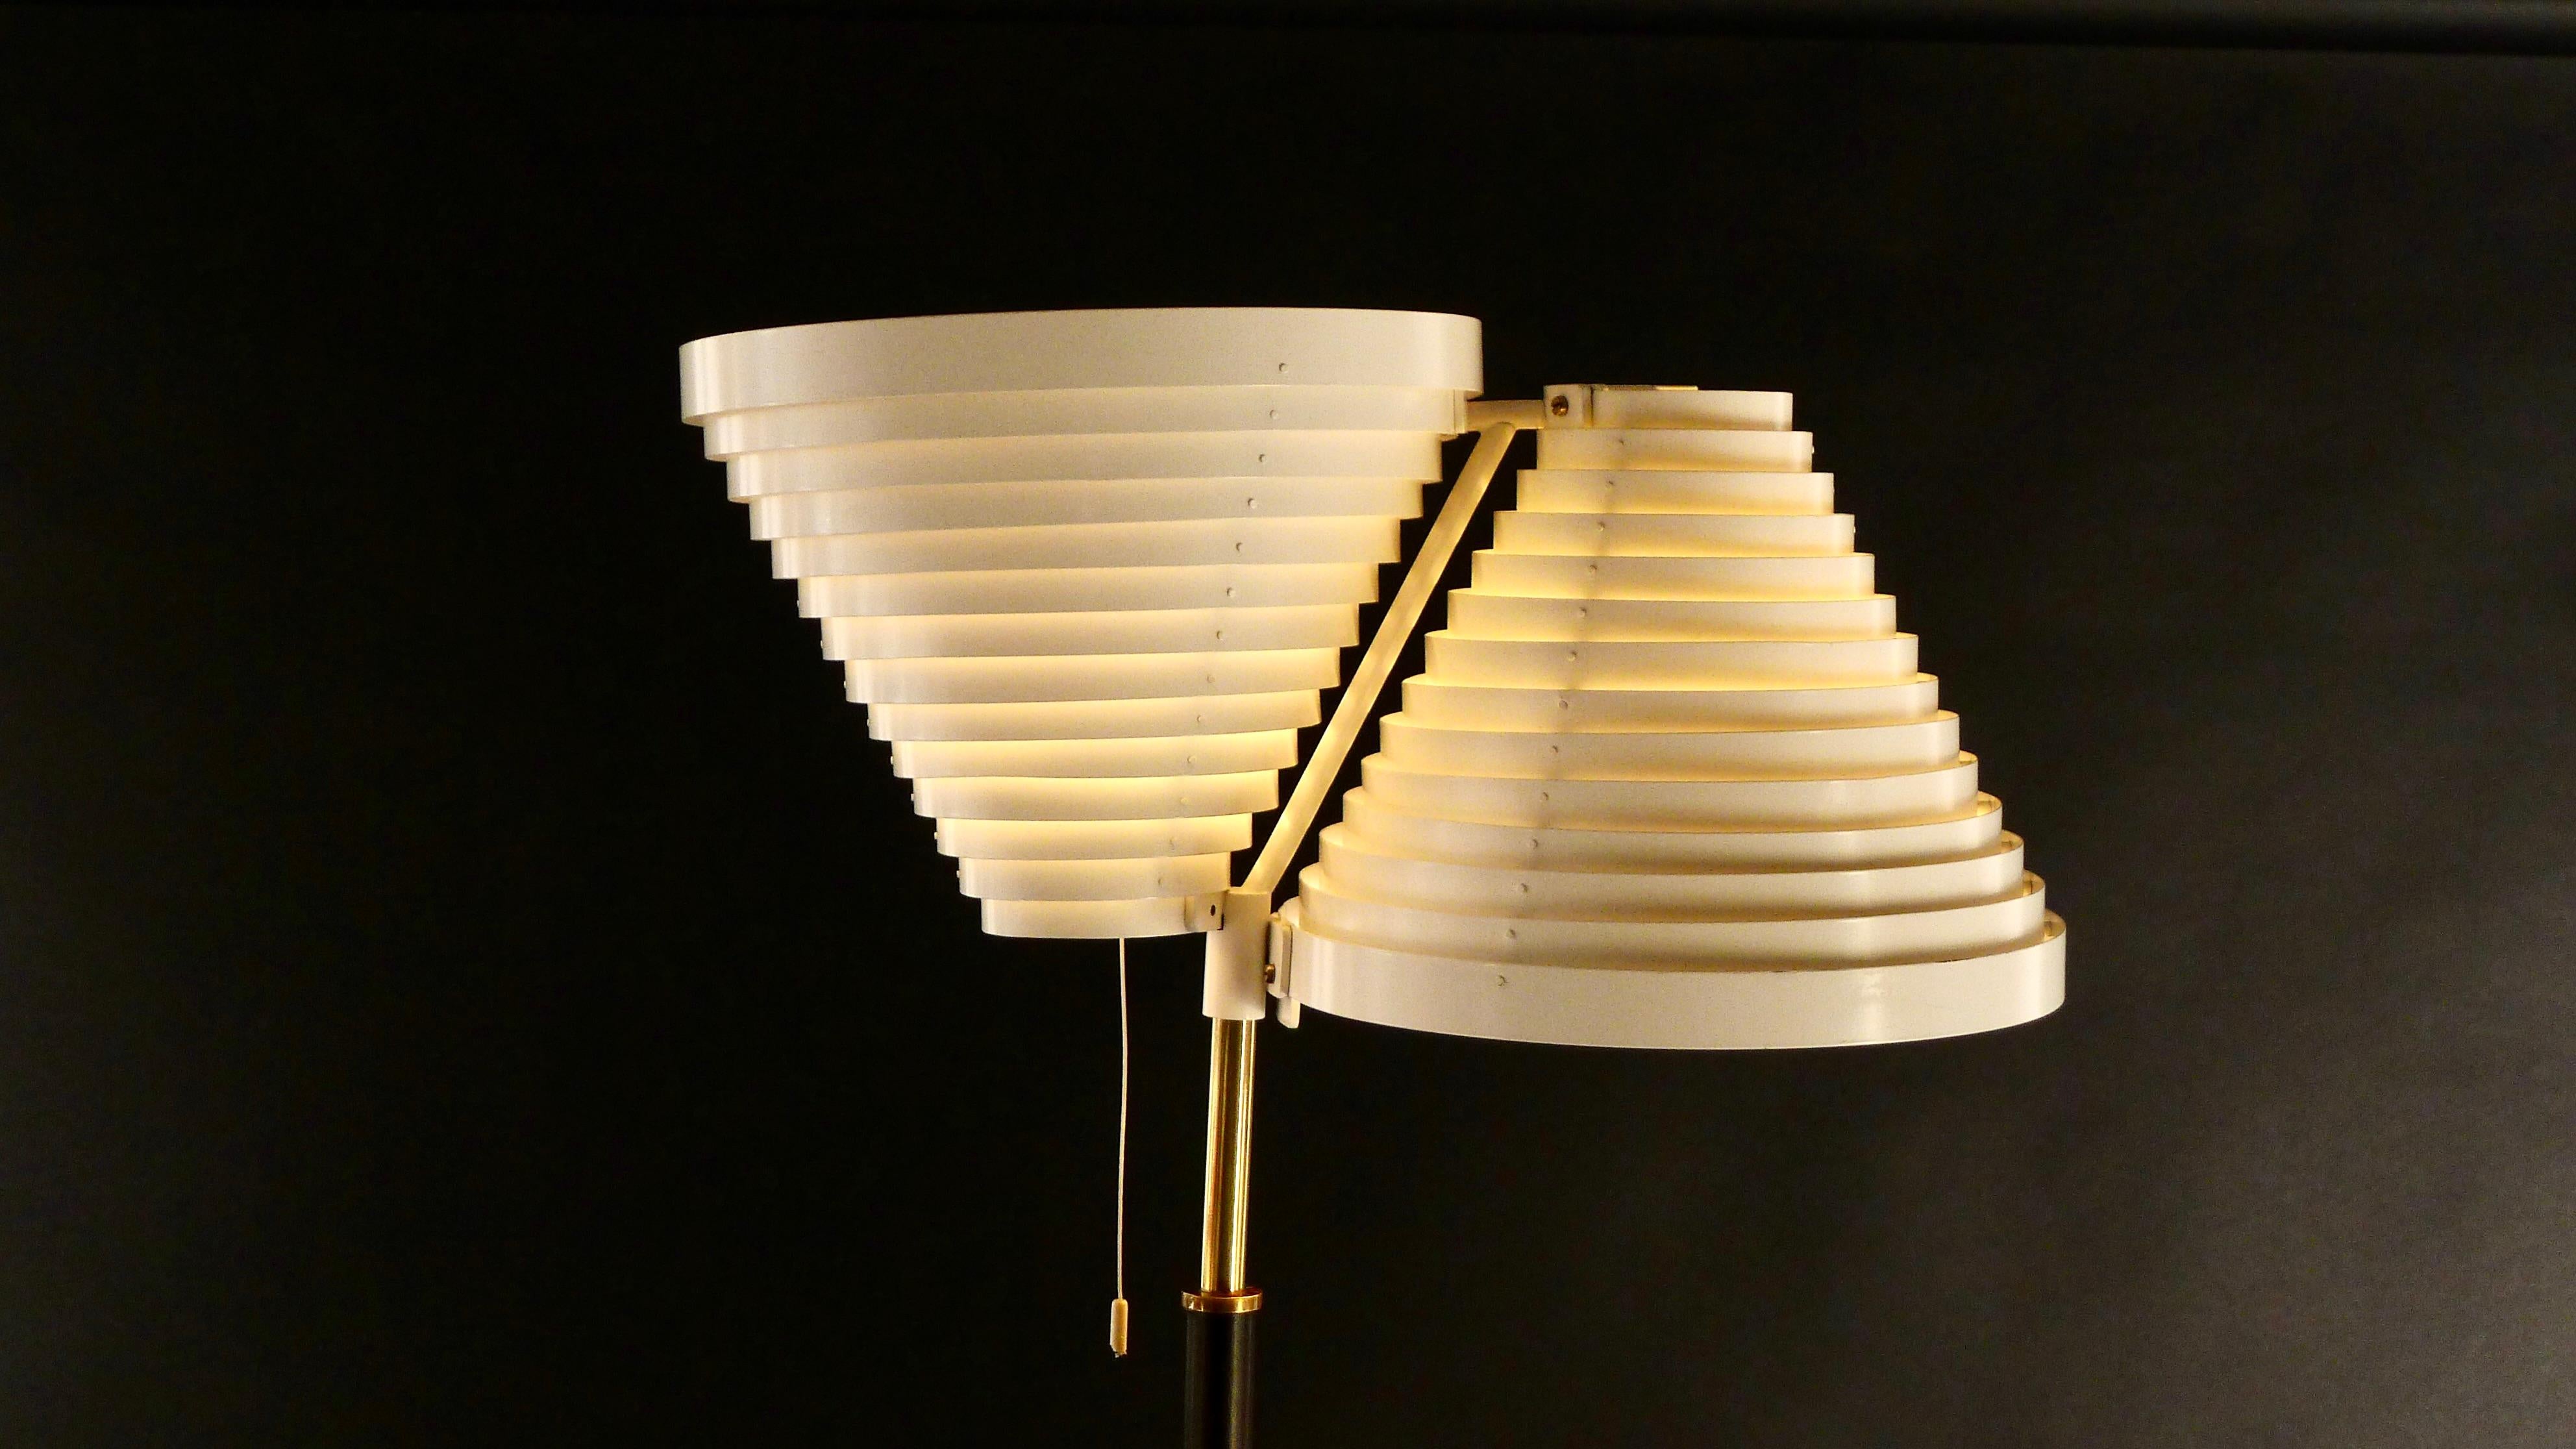 This is rare early Double Angel Wing floor lamp was designed by Alvar Aalto in 1959 and produced by Valaistystyo Ky, Helsinki, who were the first manufacturers of the lamp.

The iconic white lacquered metal louvred shades rise from a leather covered